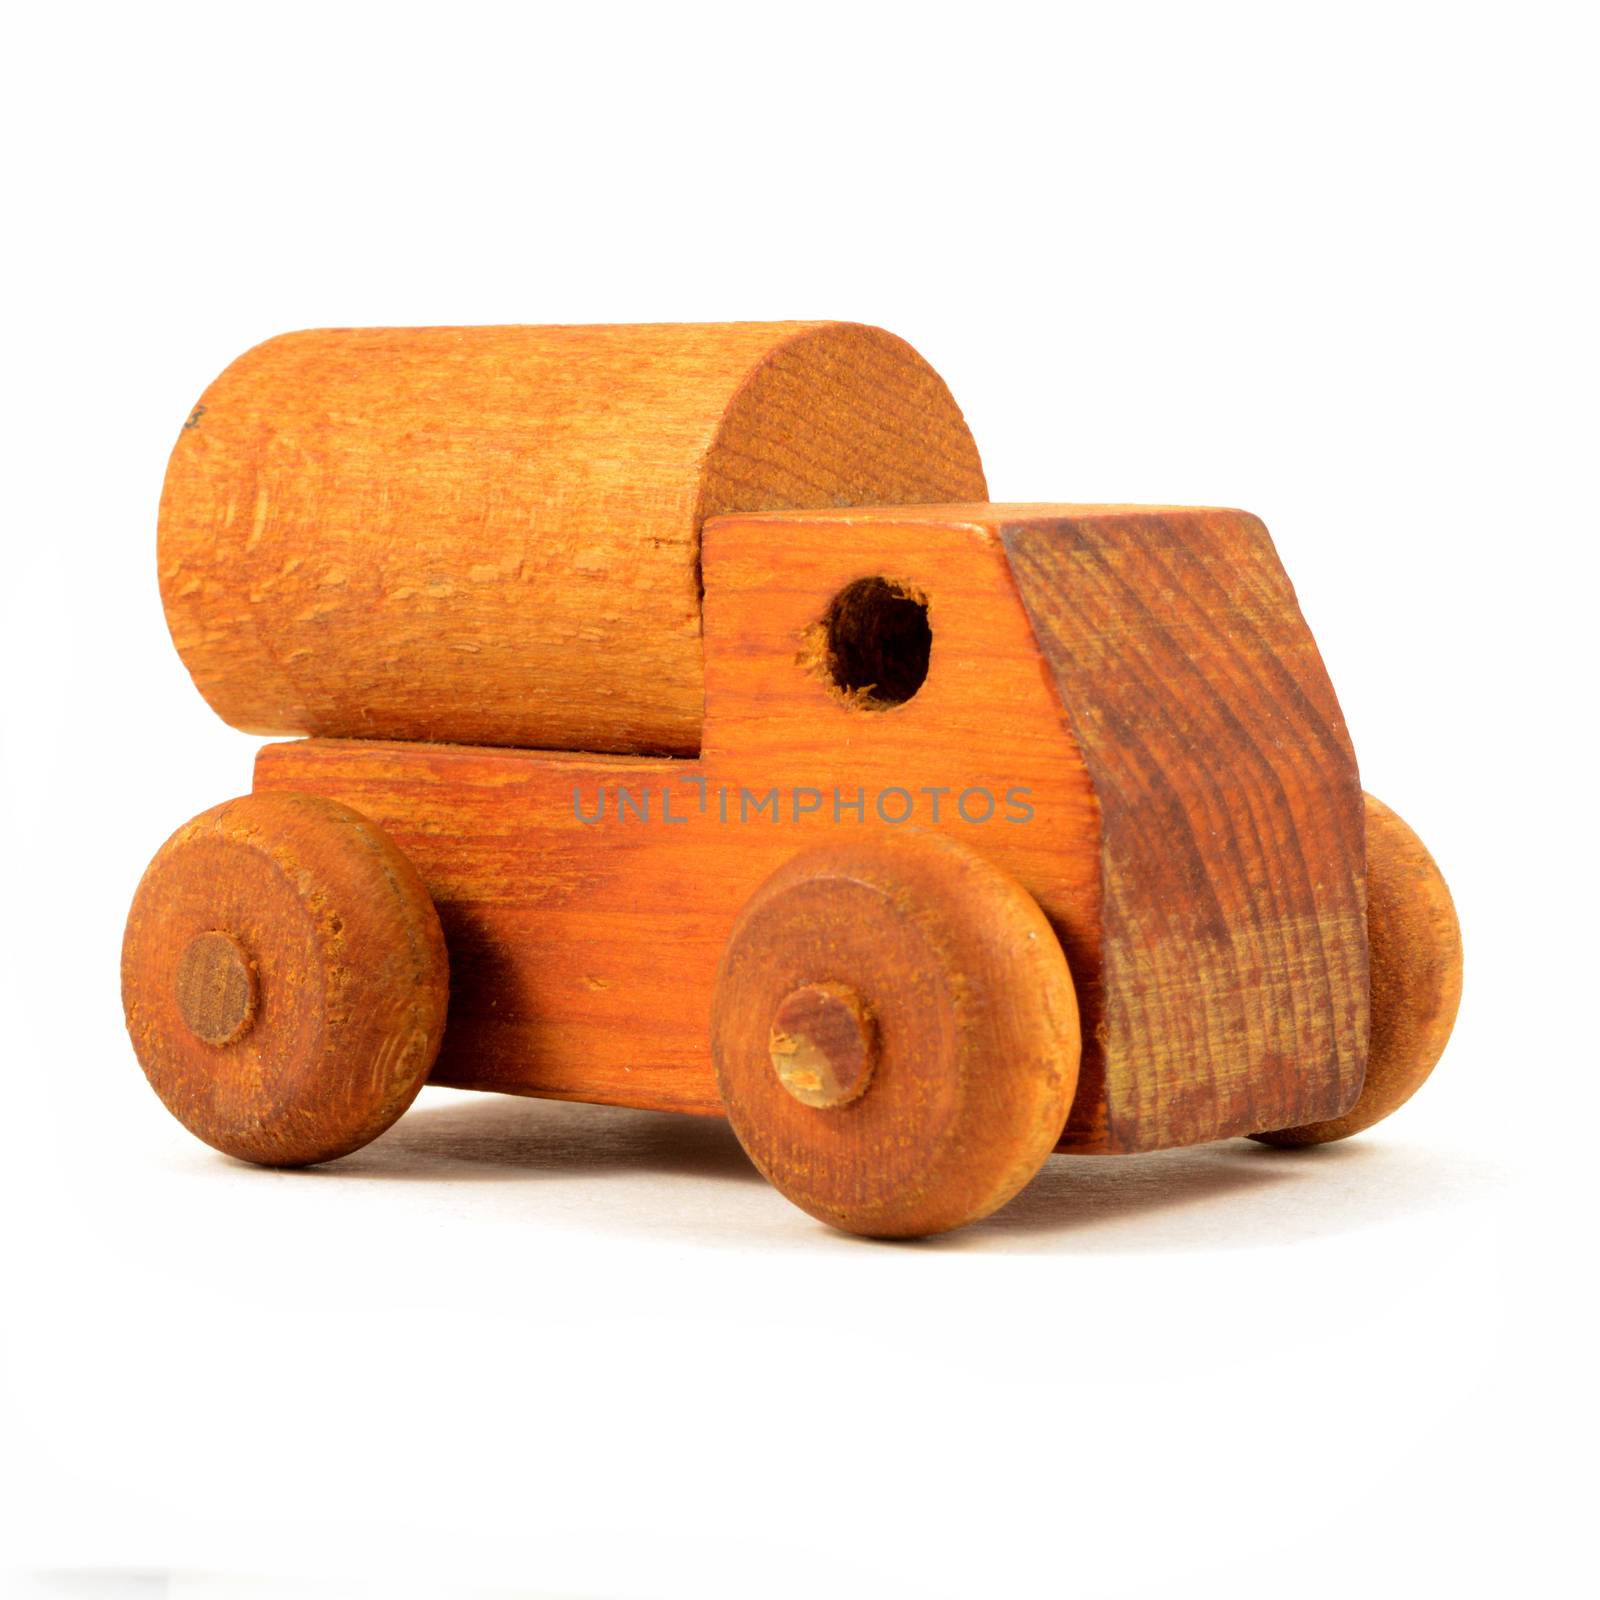 An isolated over a white background front view of a wood toy truck.